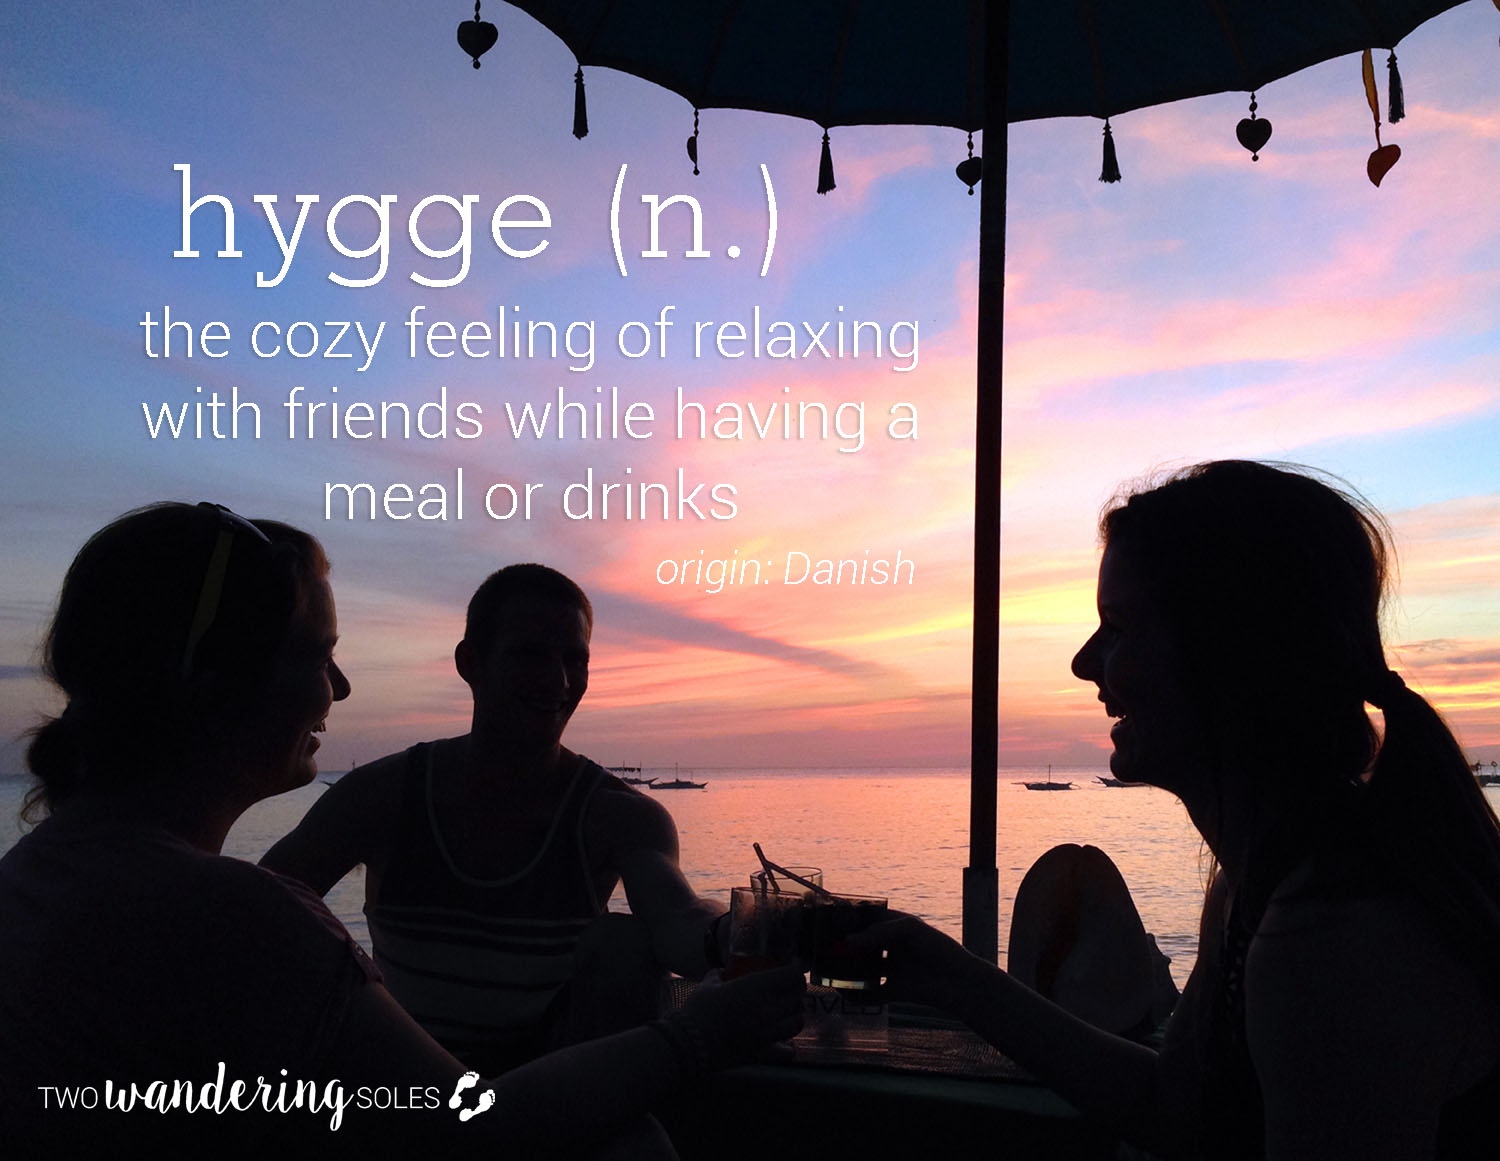 Hygge Awesome Travel Words